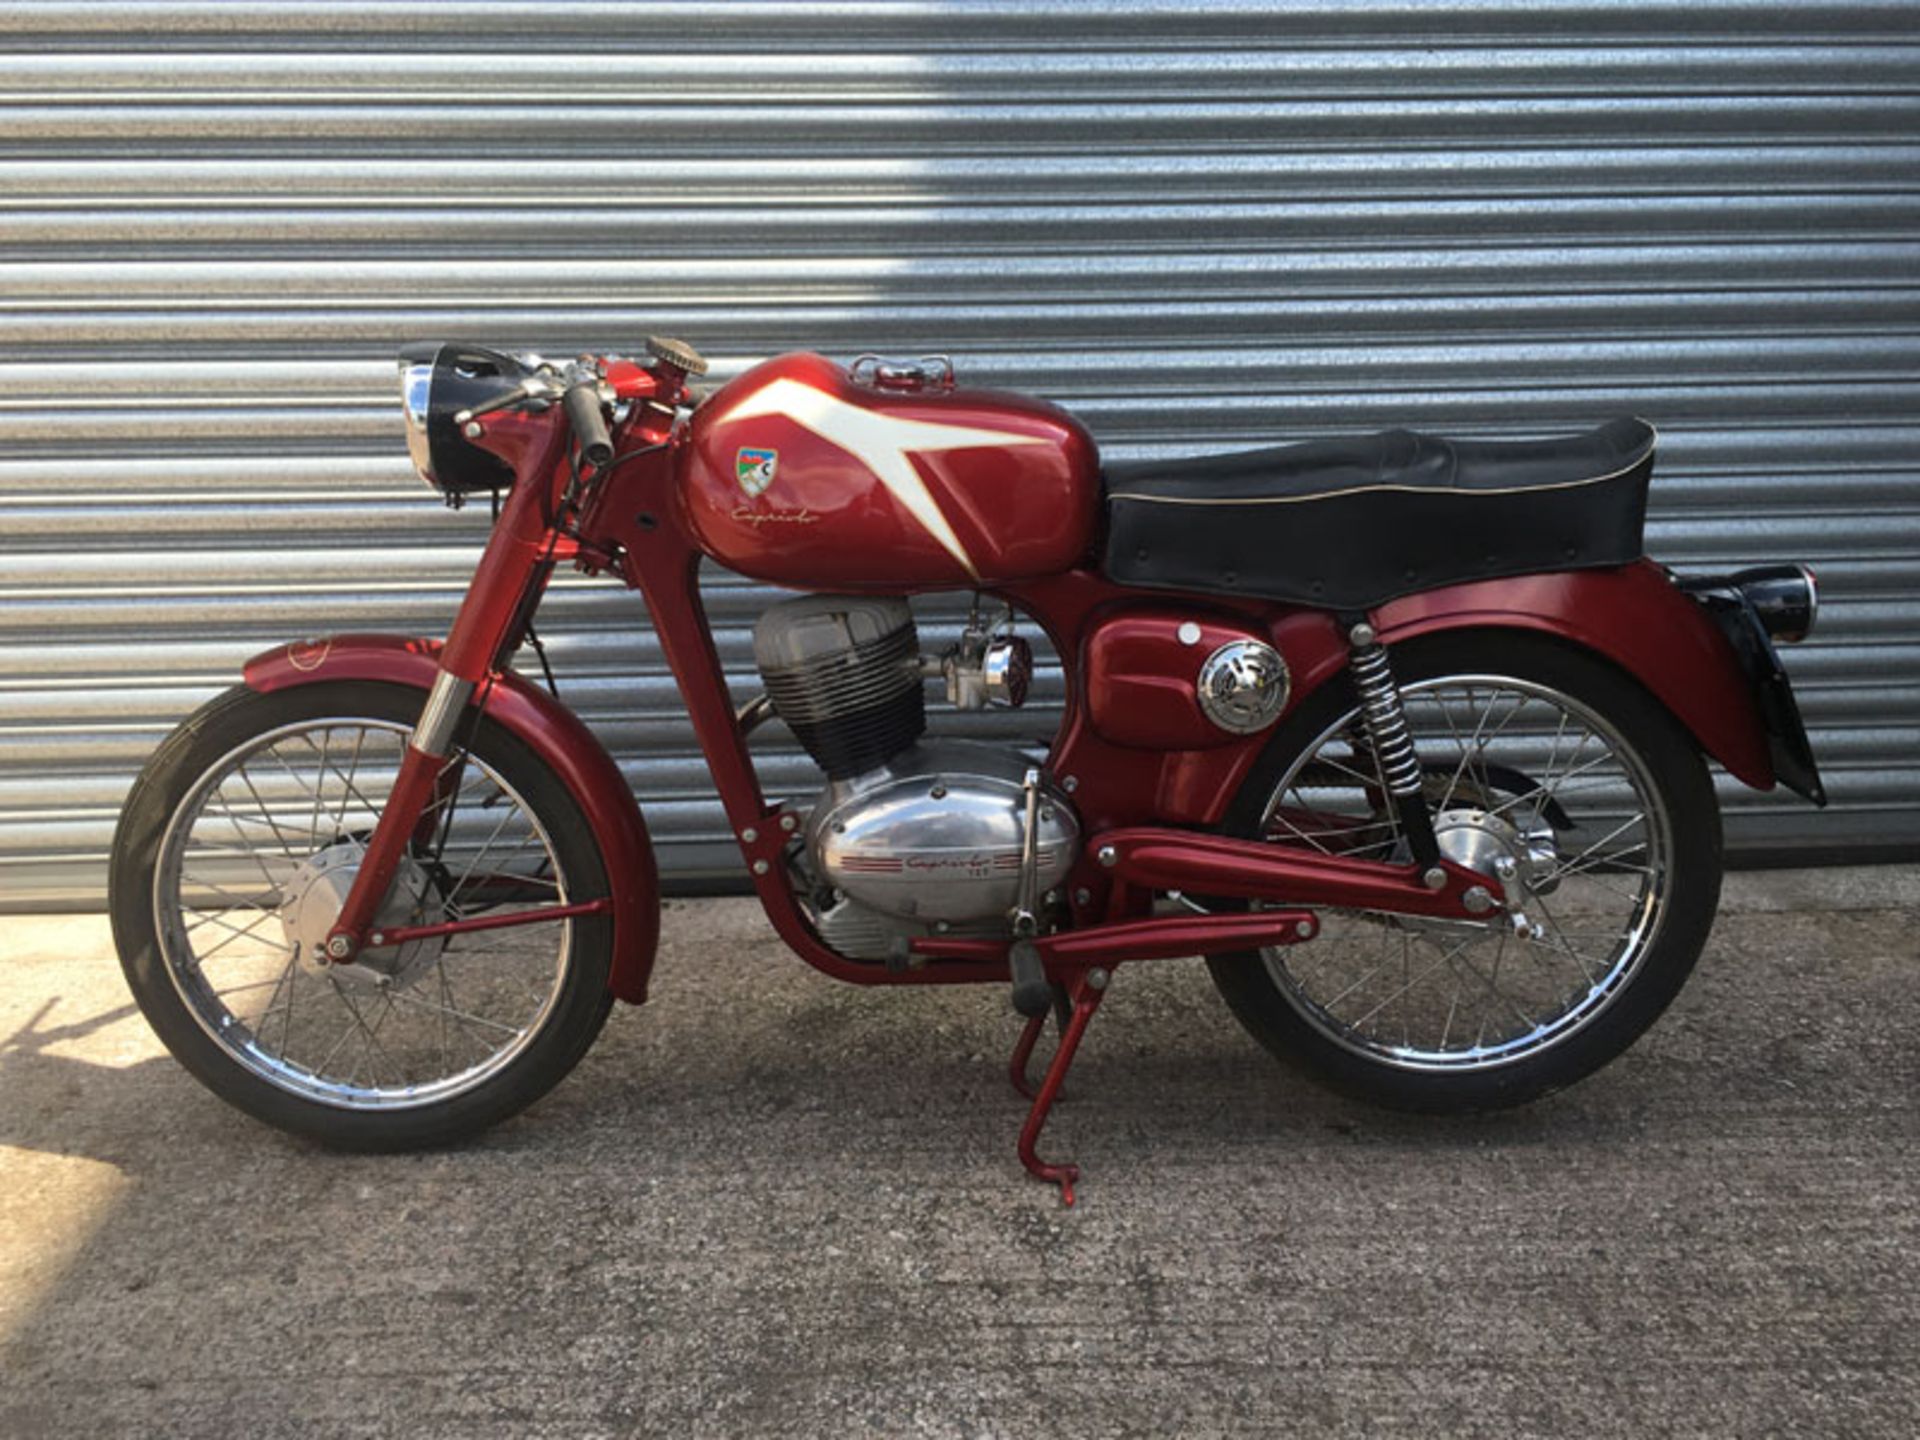 1964 Capriolo Sport 125 - Image 2 of 6